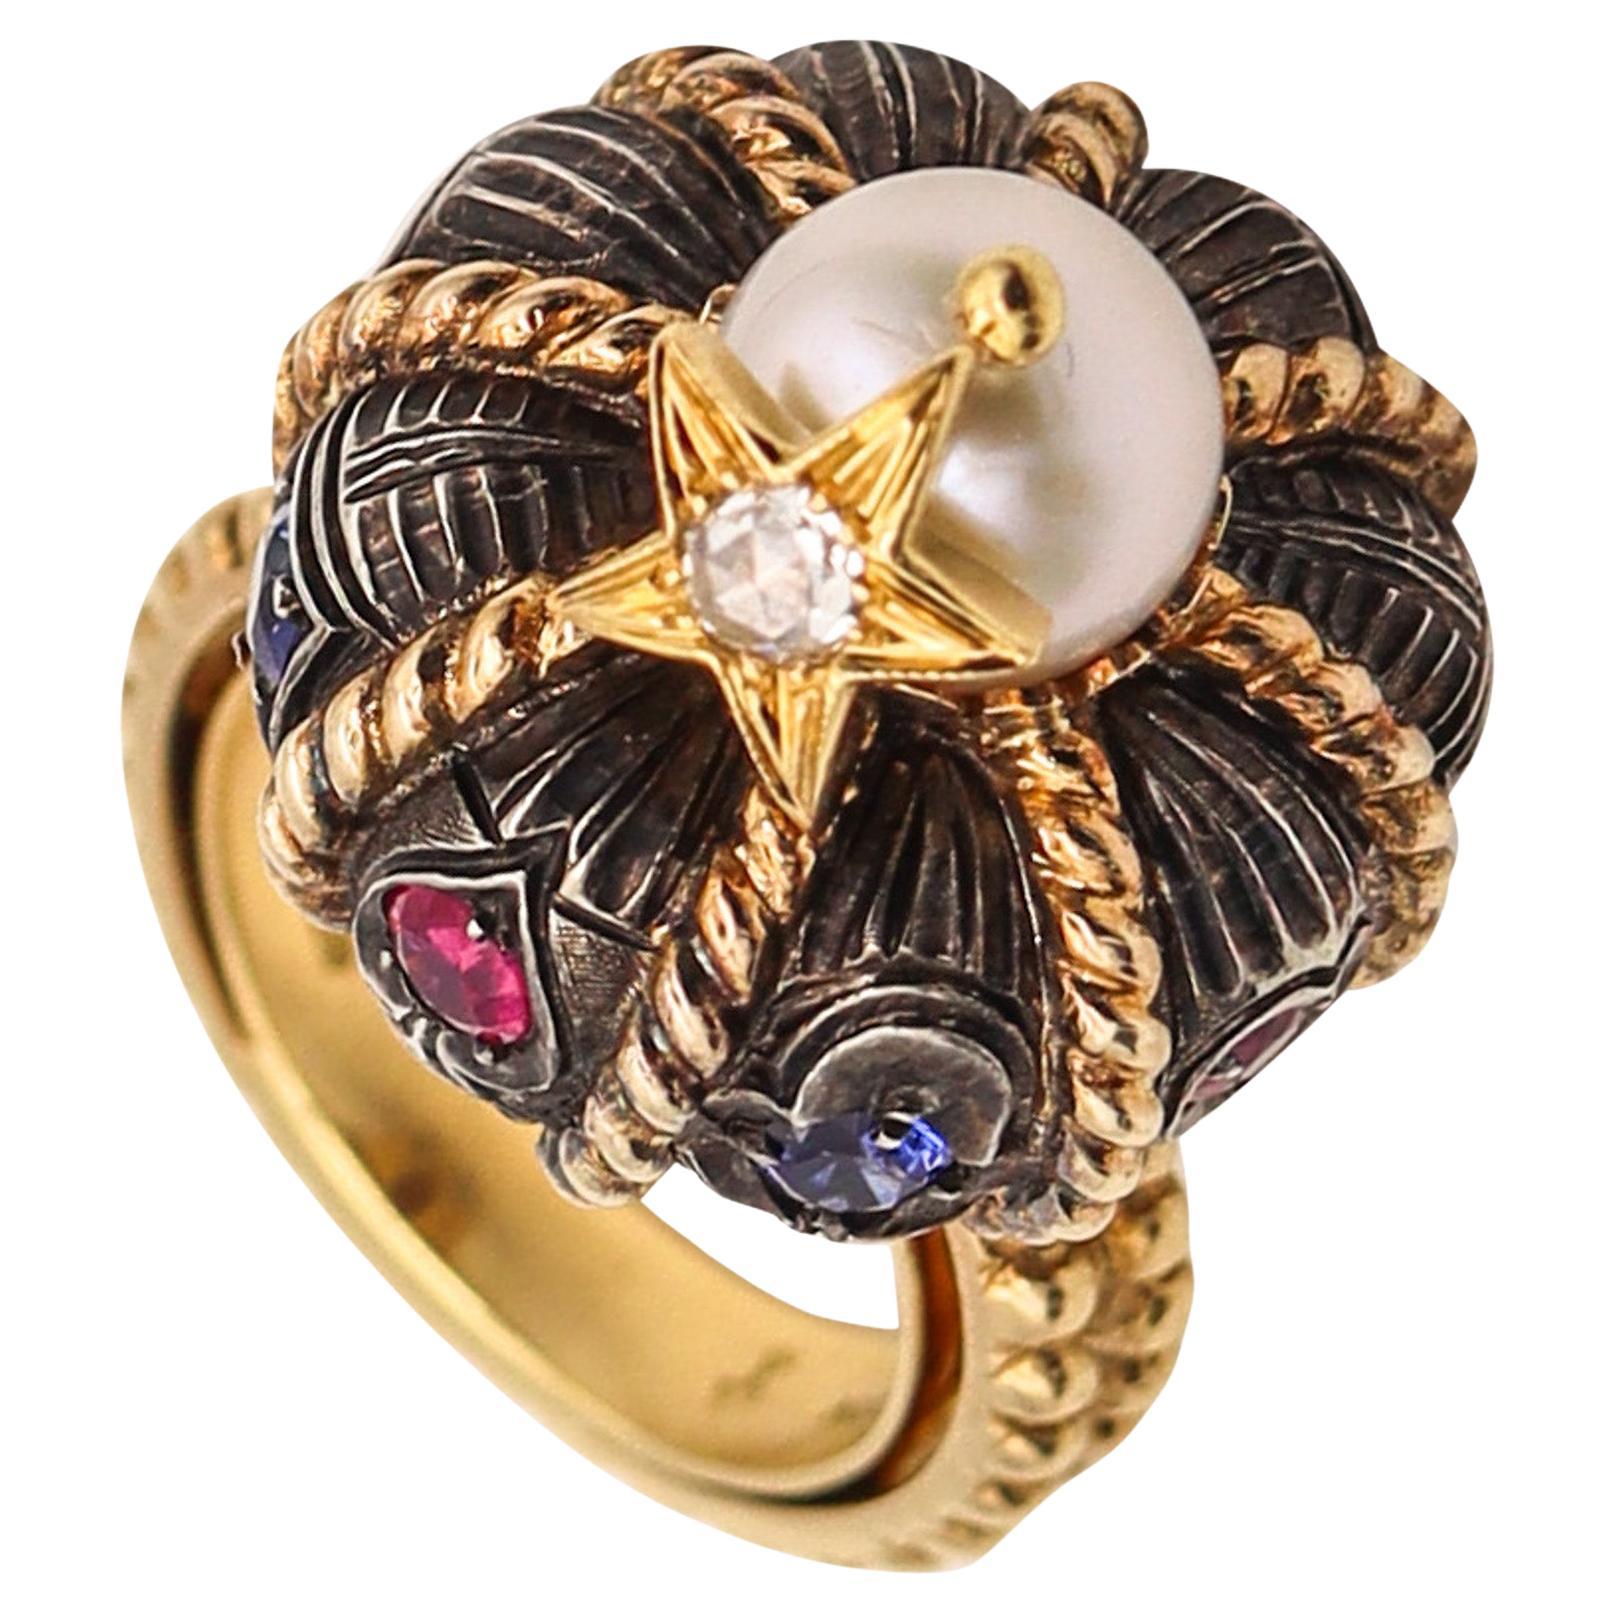 Nardi Venice Unusual Turban Cocktail Ring In 18Kt Gold With Color Gemstones For Sale